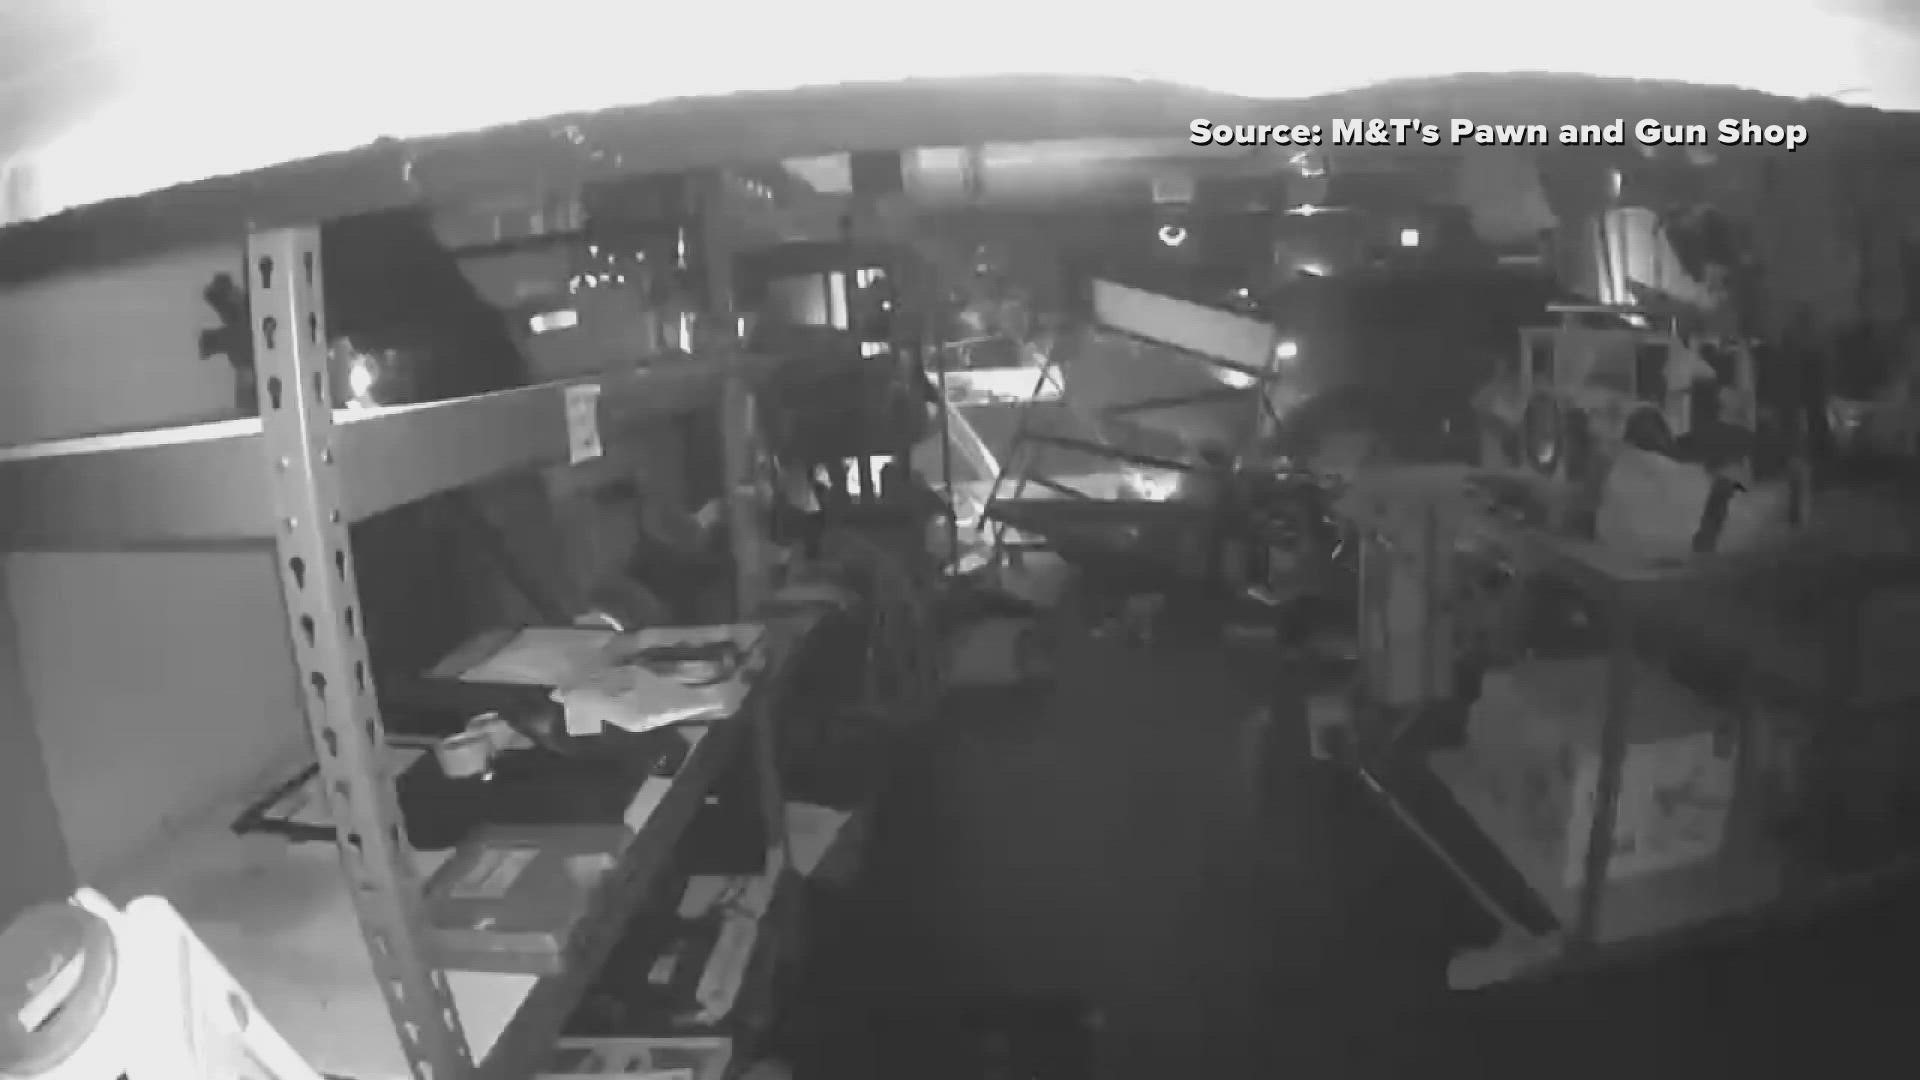 Suspects have broken into several Triad gun shops in the past two weeks. A Guilford County detective explains the trend and how law enforcement addresses it.